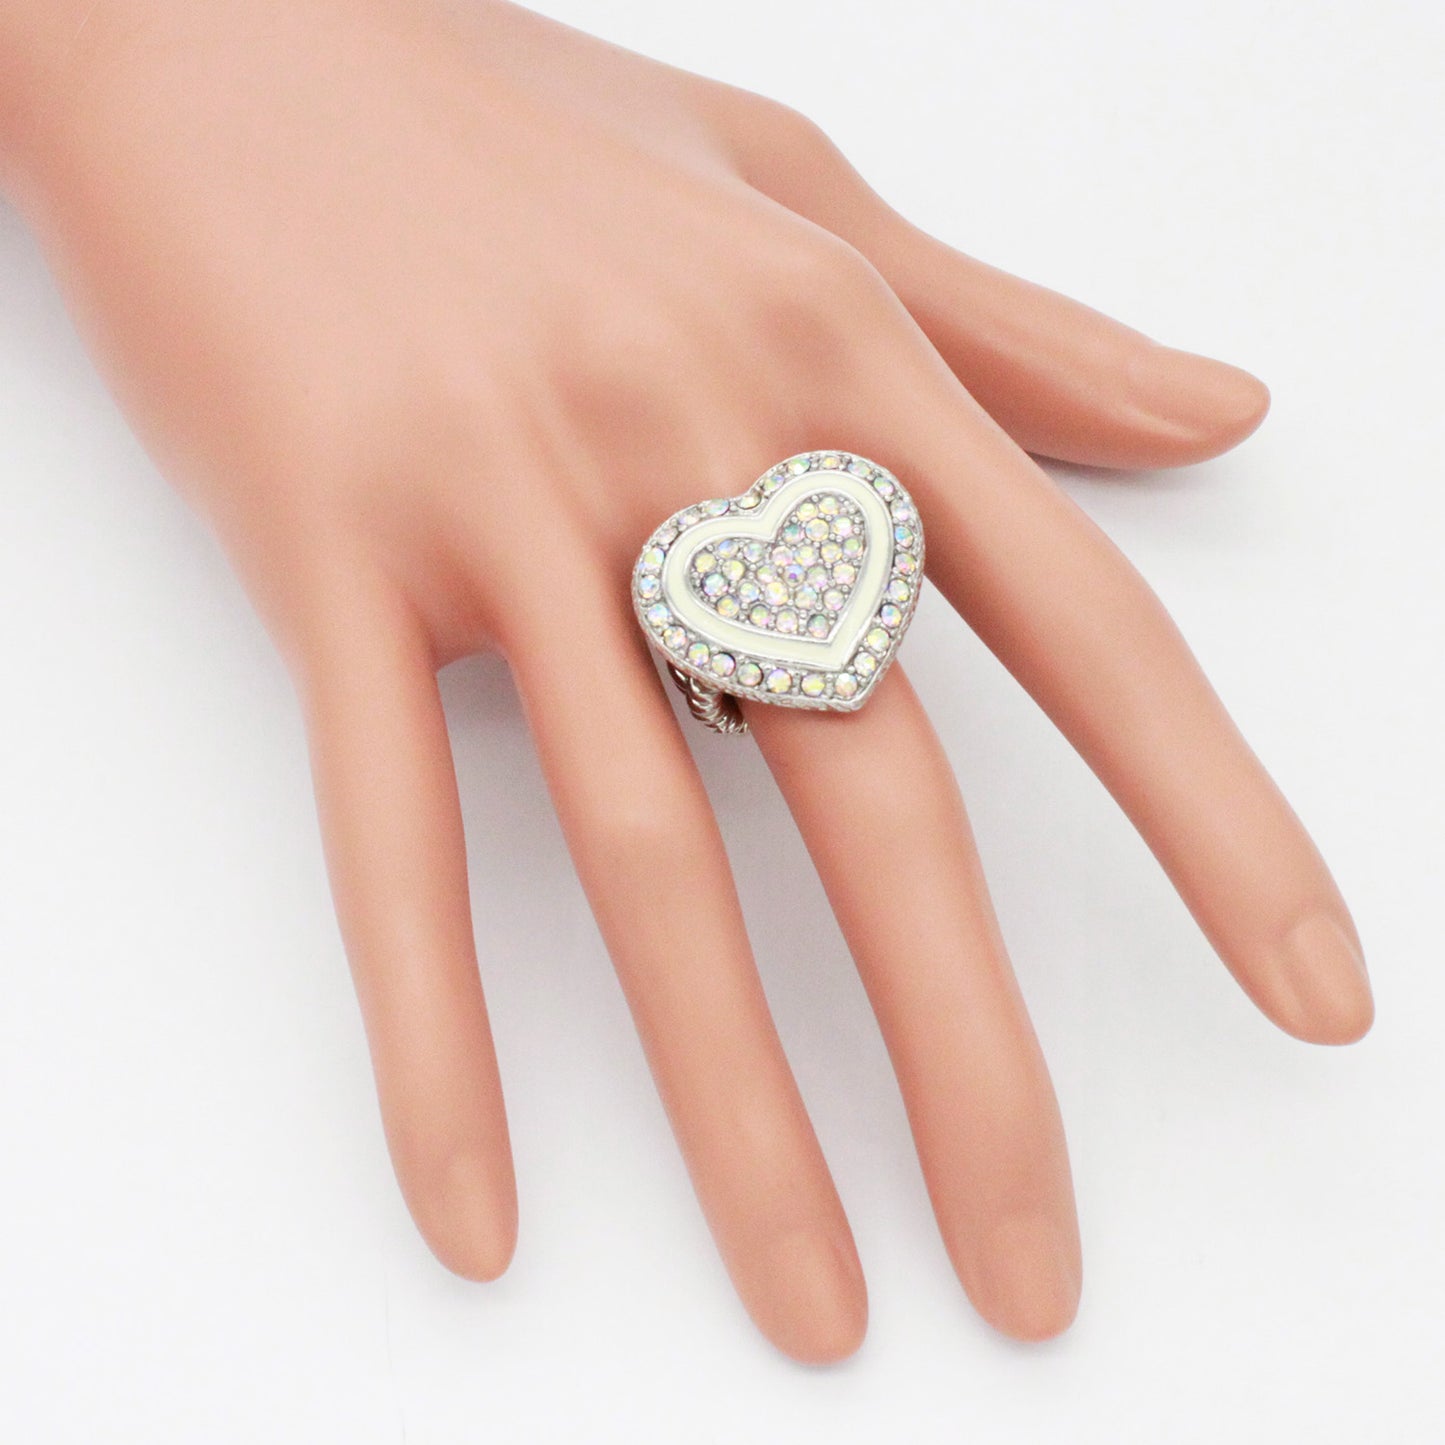 Lavencious Heart Shaped Rhinestones Stretch Rings for Women Size for 7-9(Silver AB)